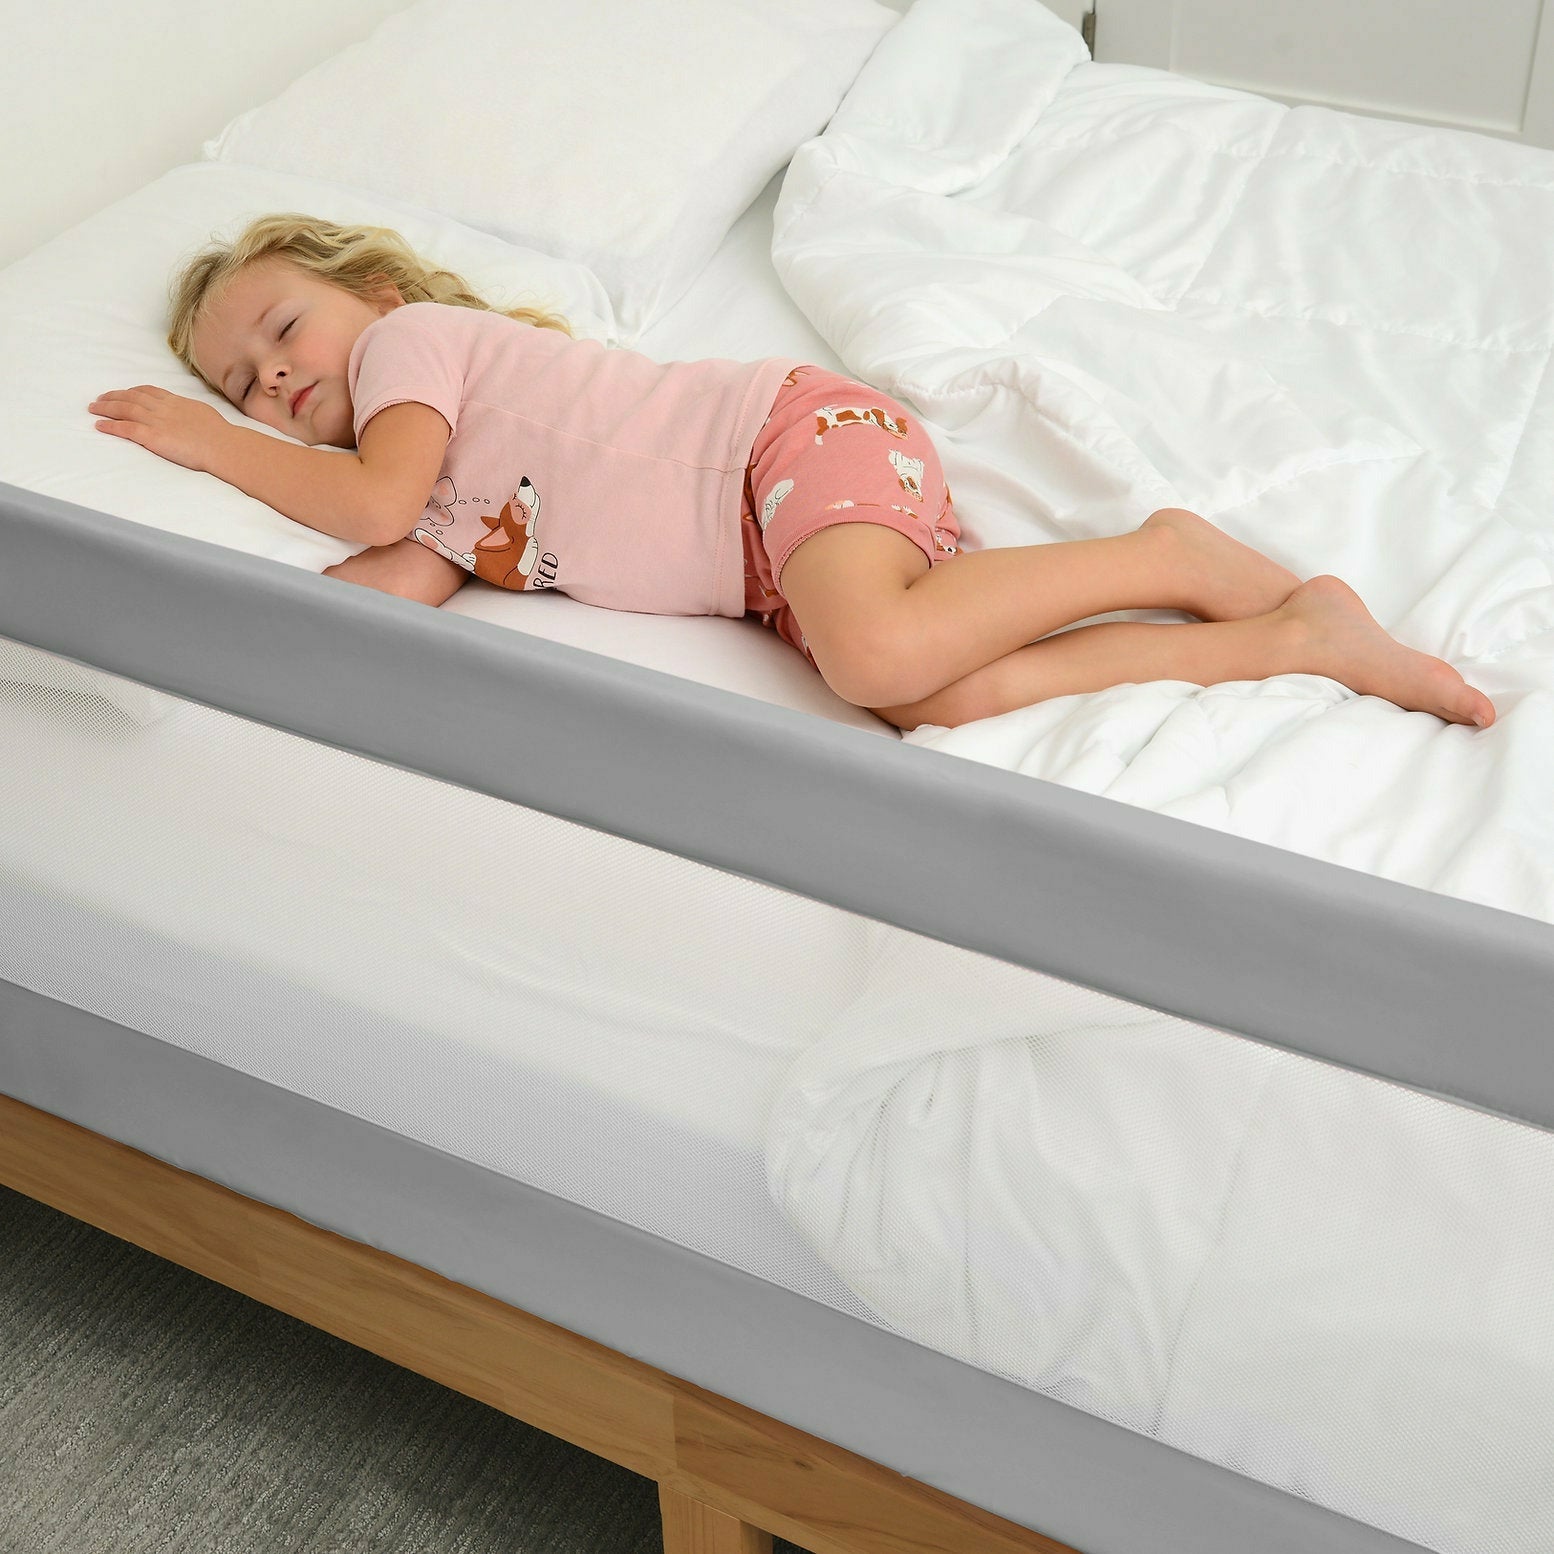 Venice Child Extra Long Toddler Bed Rail in Gray